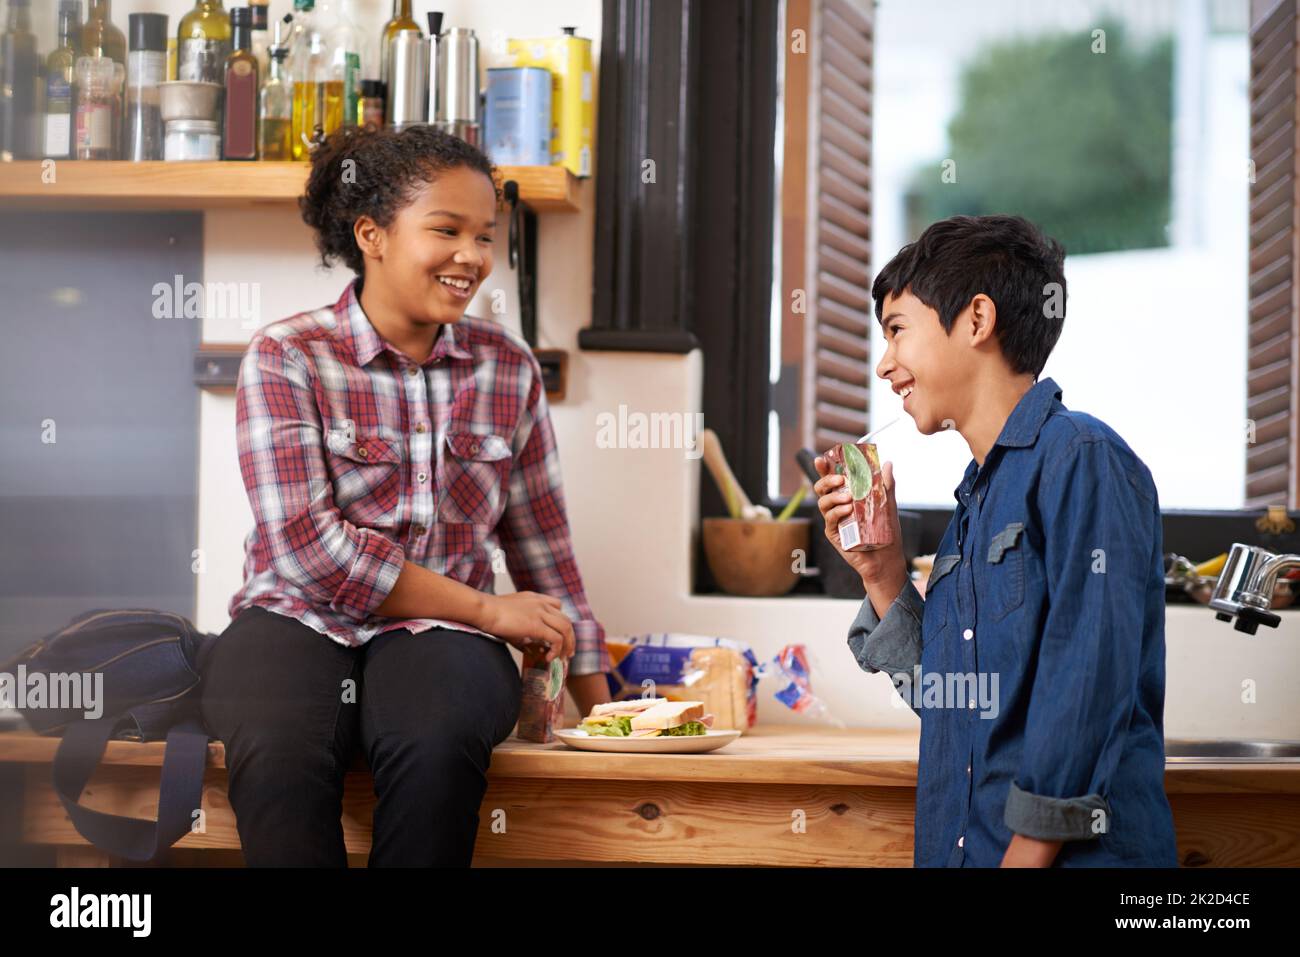 Having a tasty nibble after school. Shot of two young teenagers enjoying a snack together in the kitchen. Stock Photo